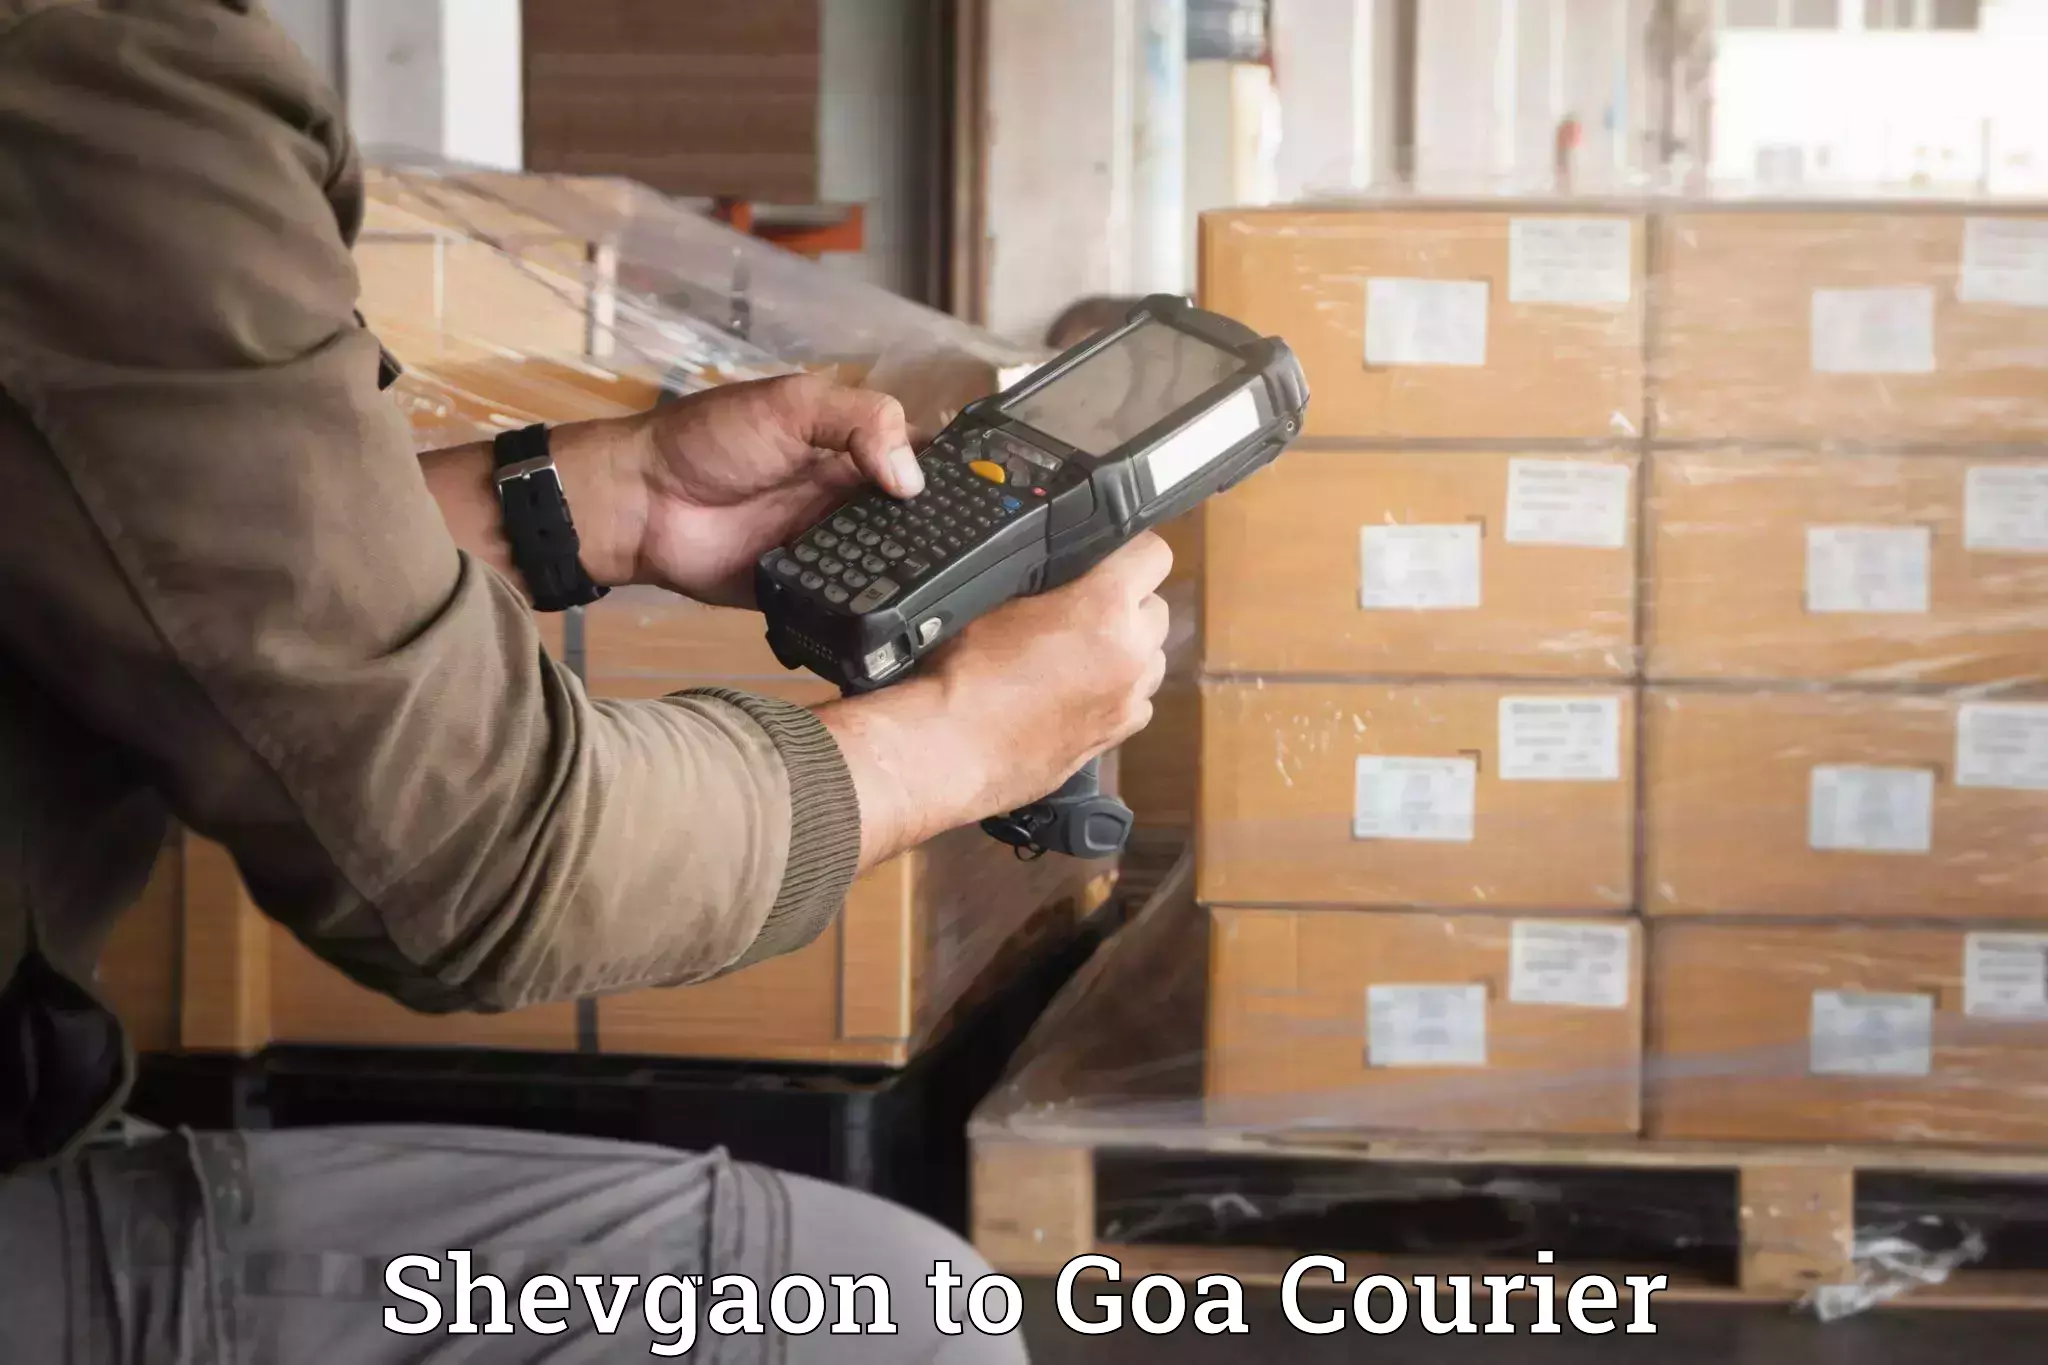 Luggage transport consultancy Shevgaon to South Goa